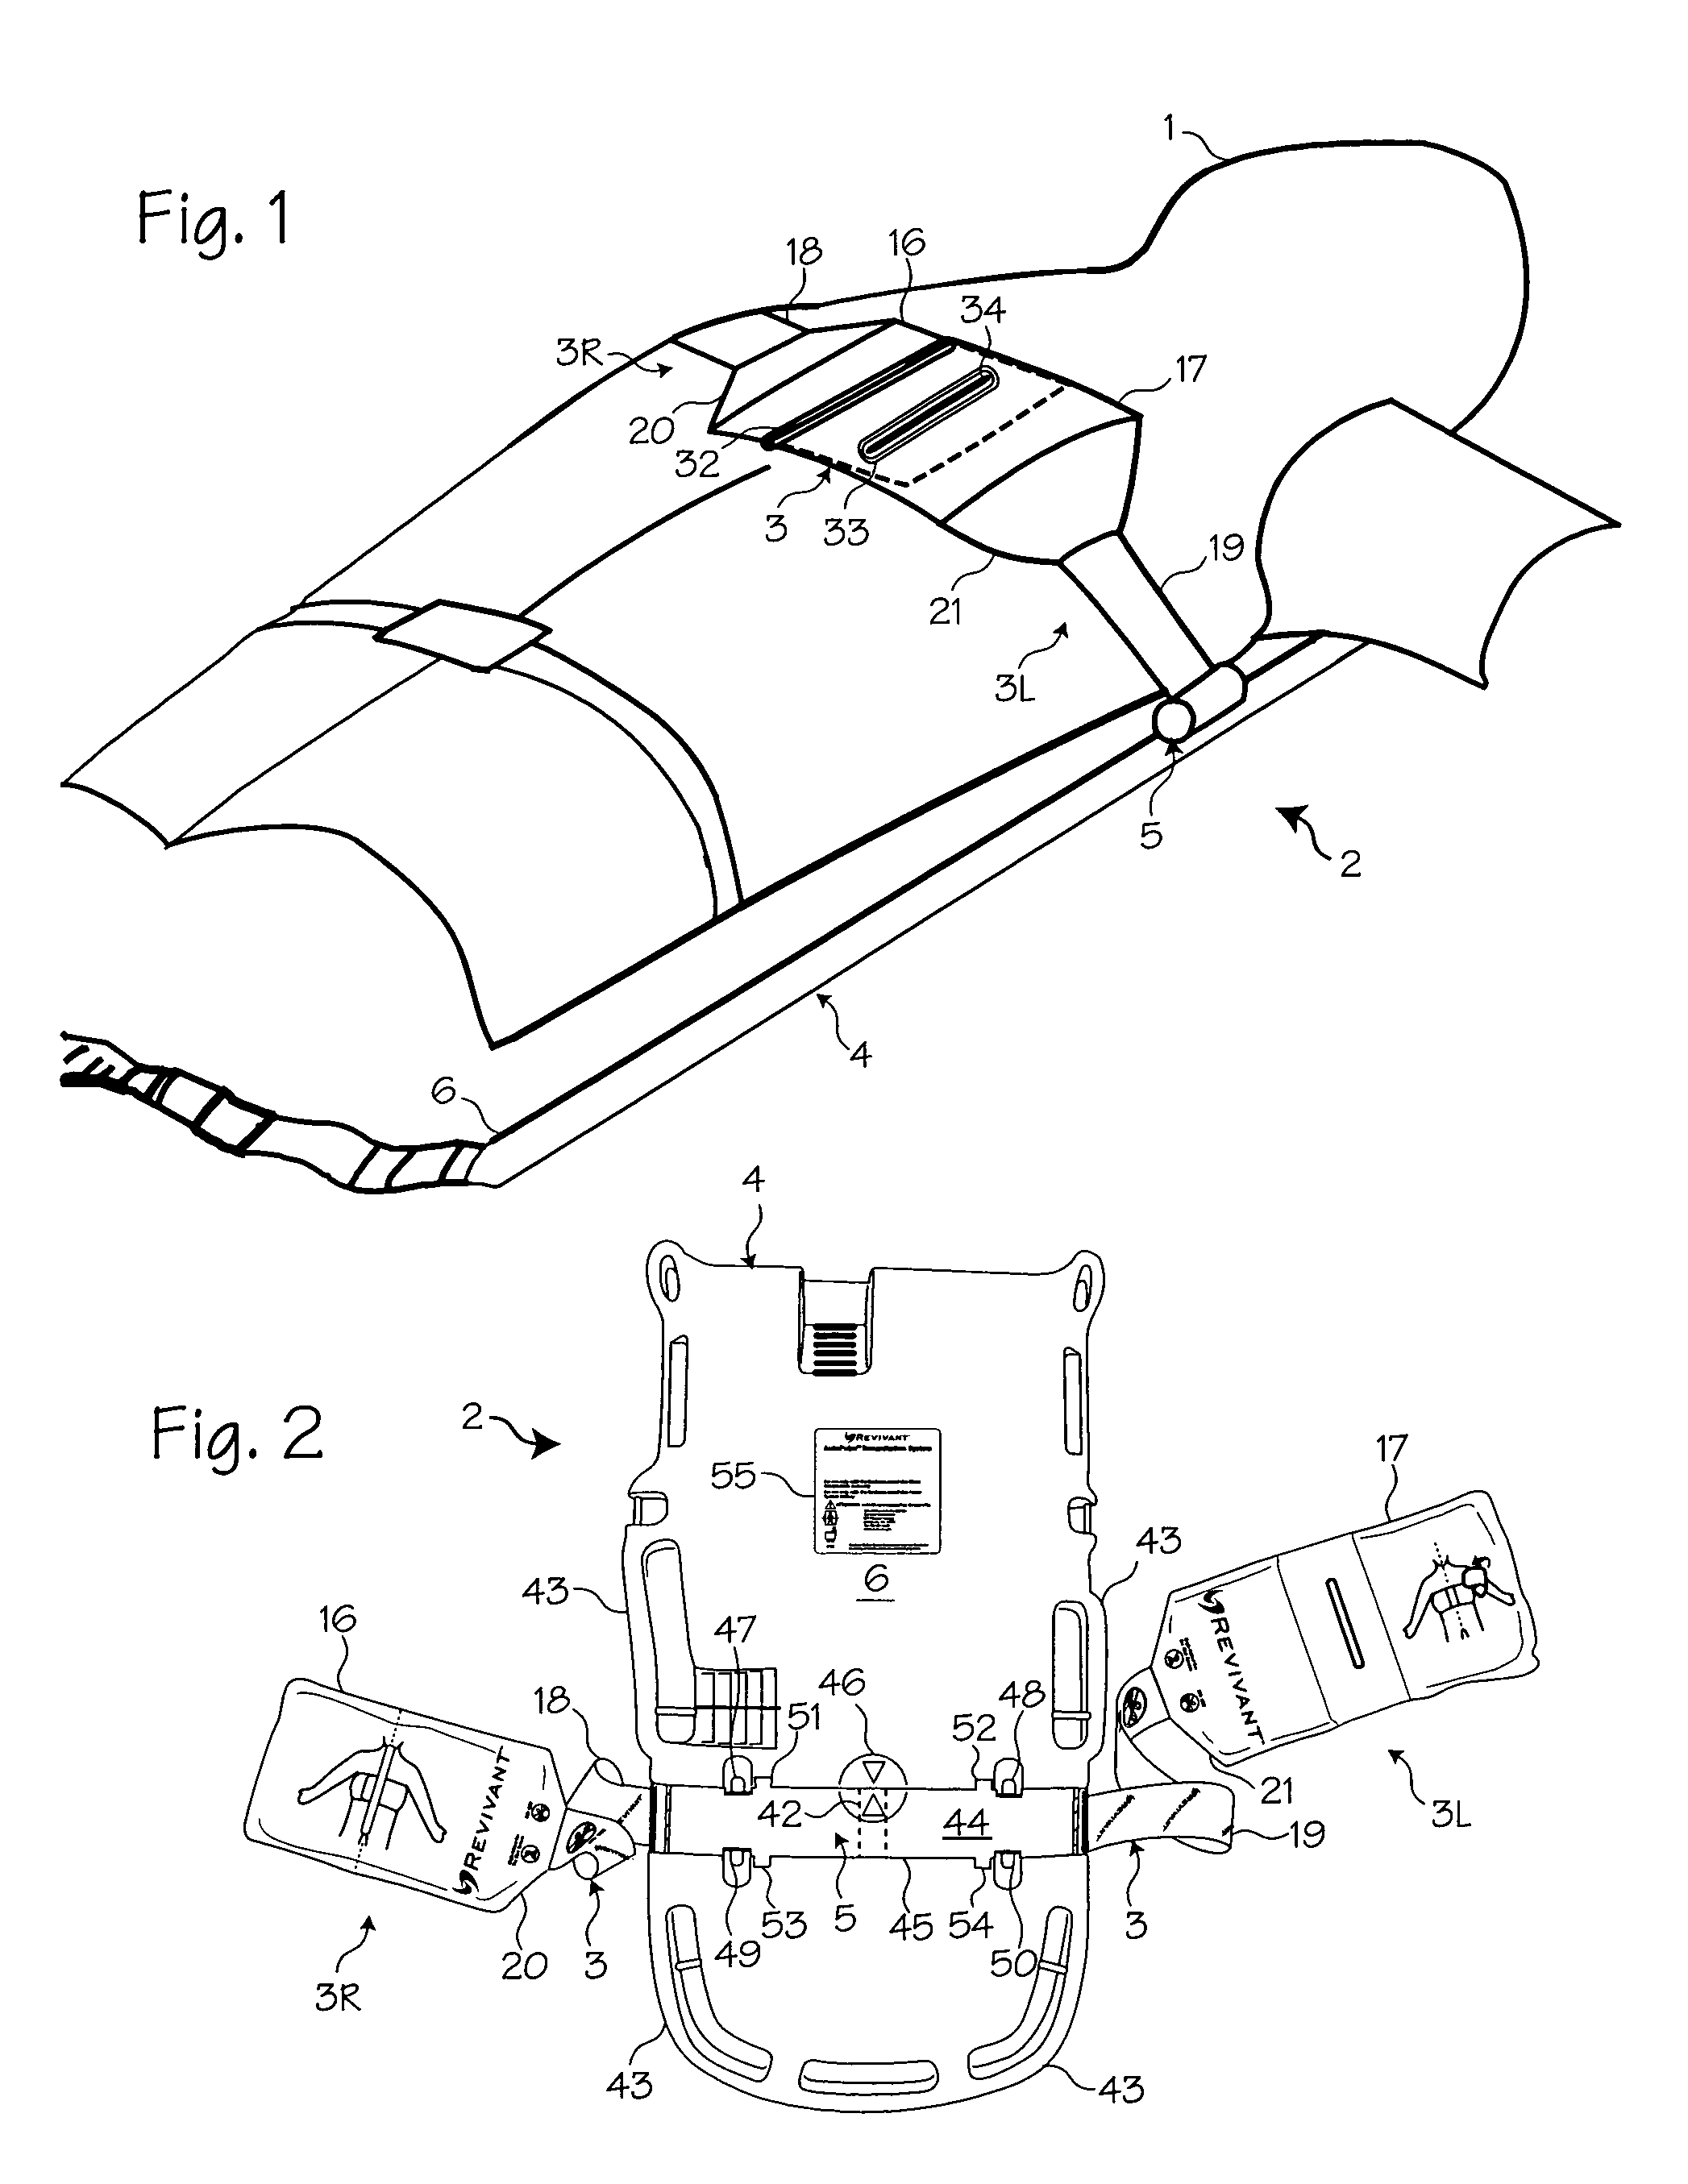 Compression belt system for use with chest compression devices